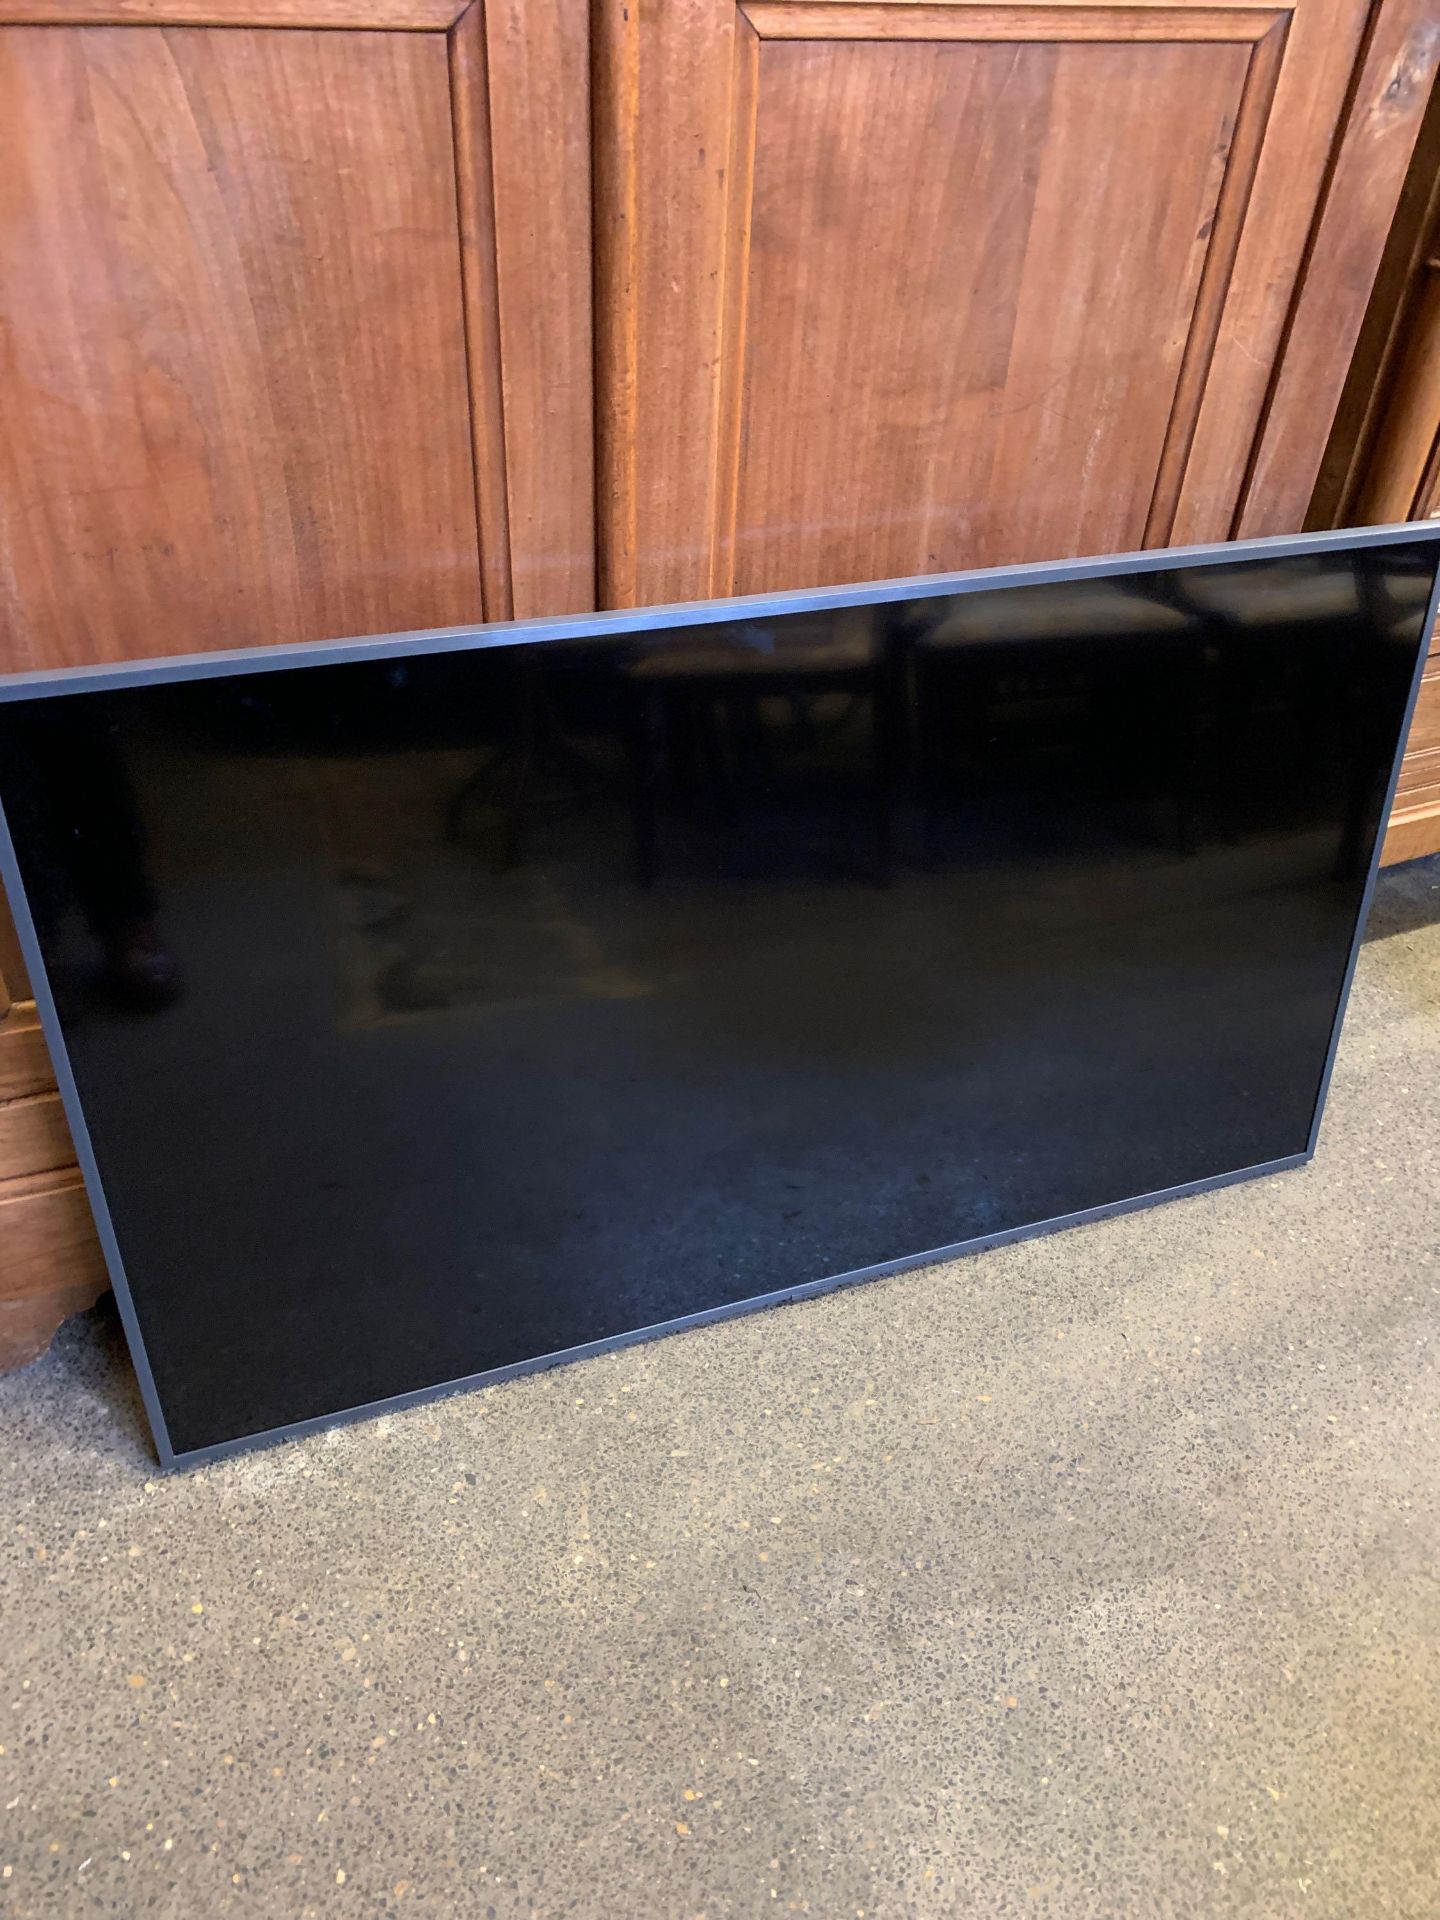 Samsung UE55RU7400U TV. To be sold on the authority of the Official Receiver, and carries VAT